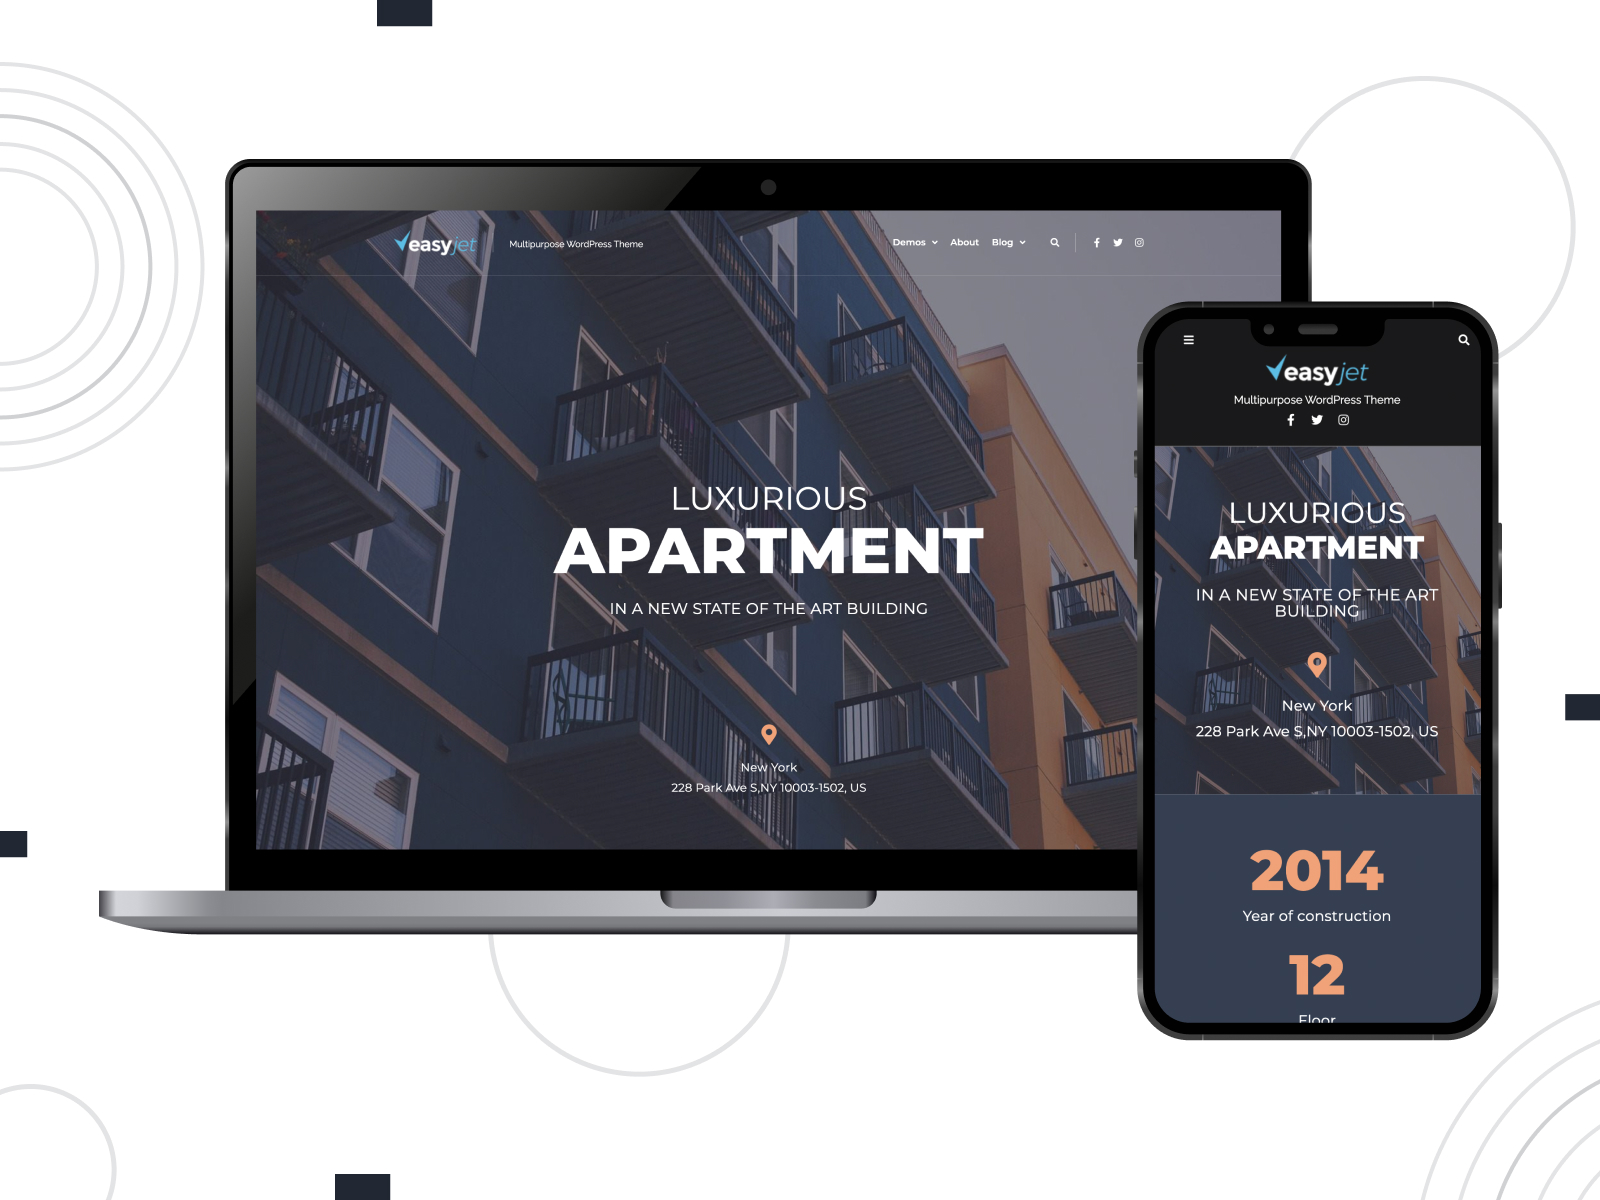 Picture of EasyJet, SEO-friendly & mobile-ready Elementor theme for real estate with 9 JetPlugins in royalblue, peru, black, and white chromatic scheme.